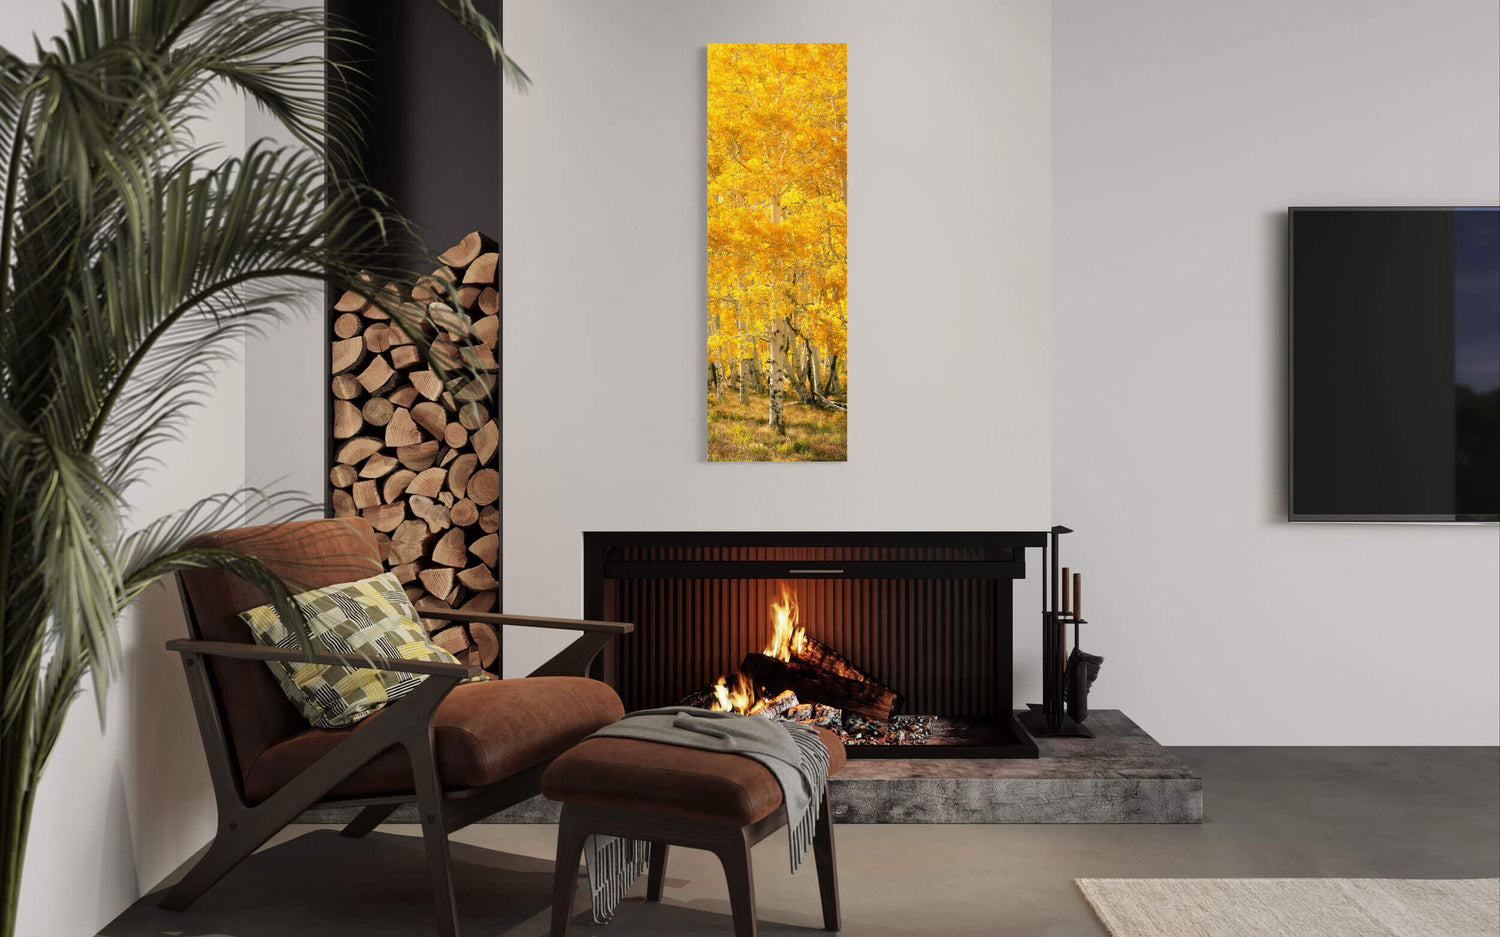 A piece of Telluride art showing an aspen tree during fall in Telluride hangs in a living room.